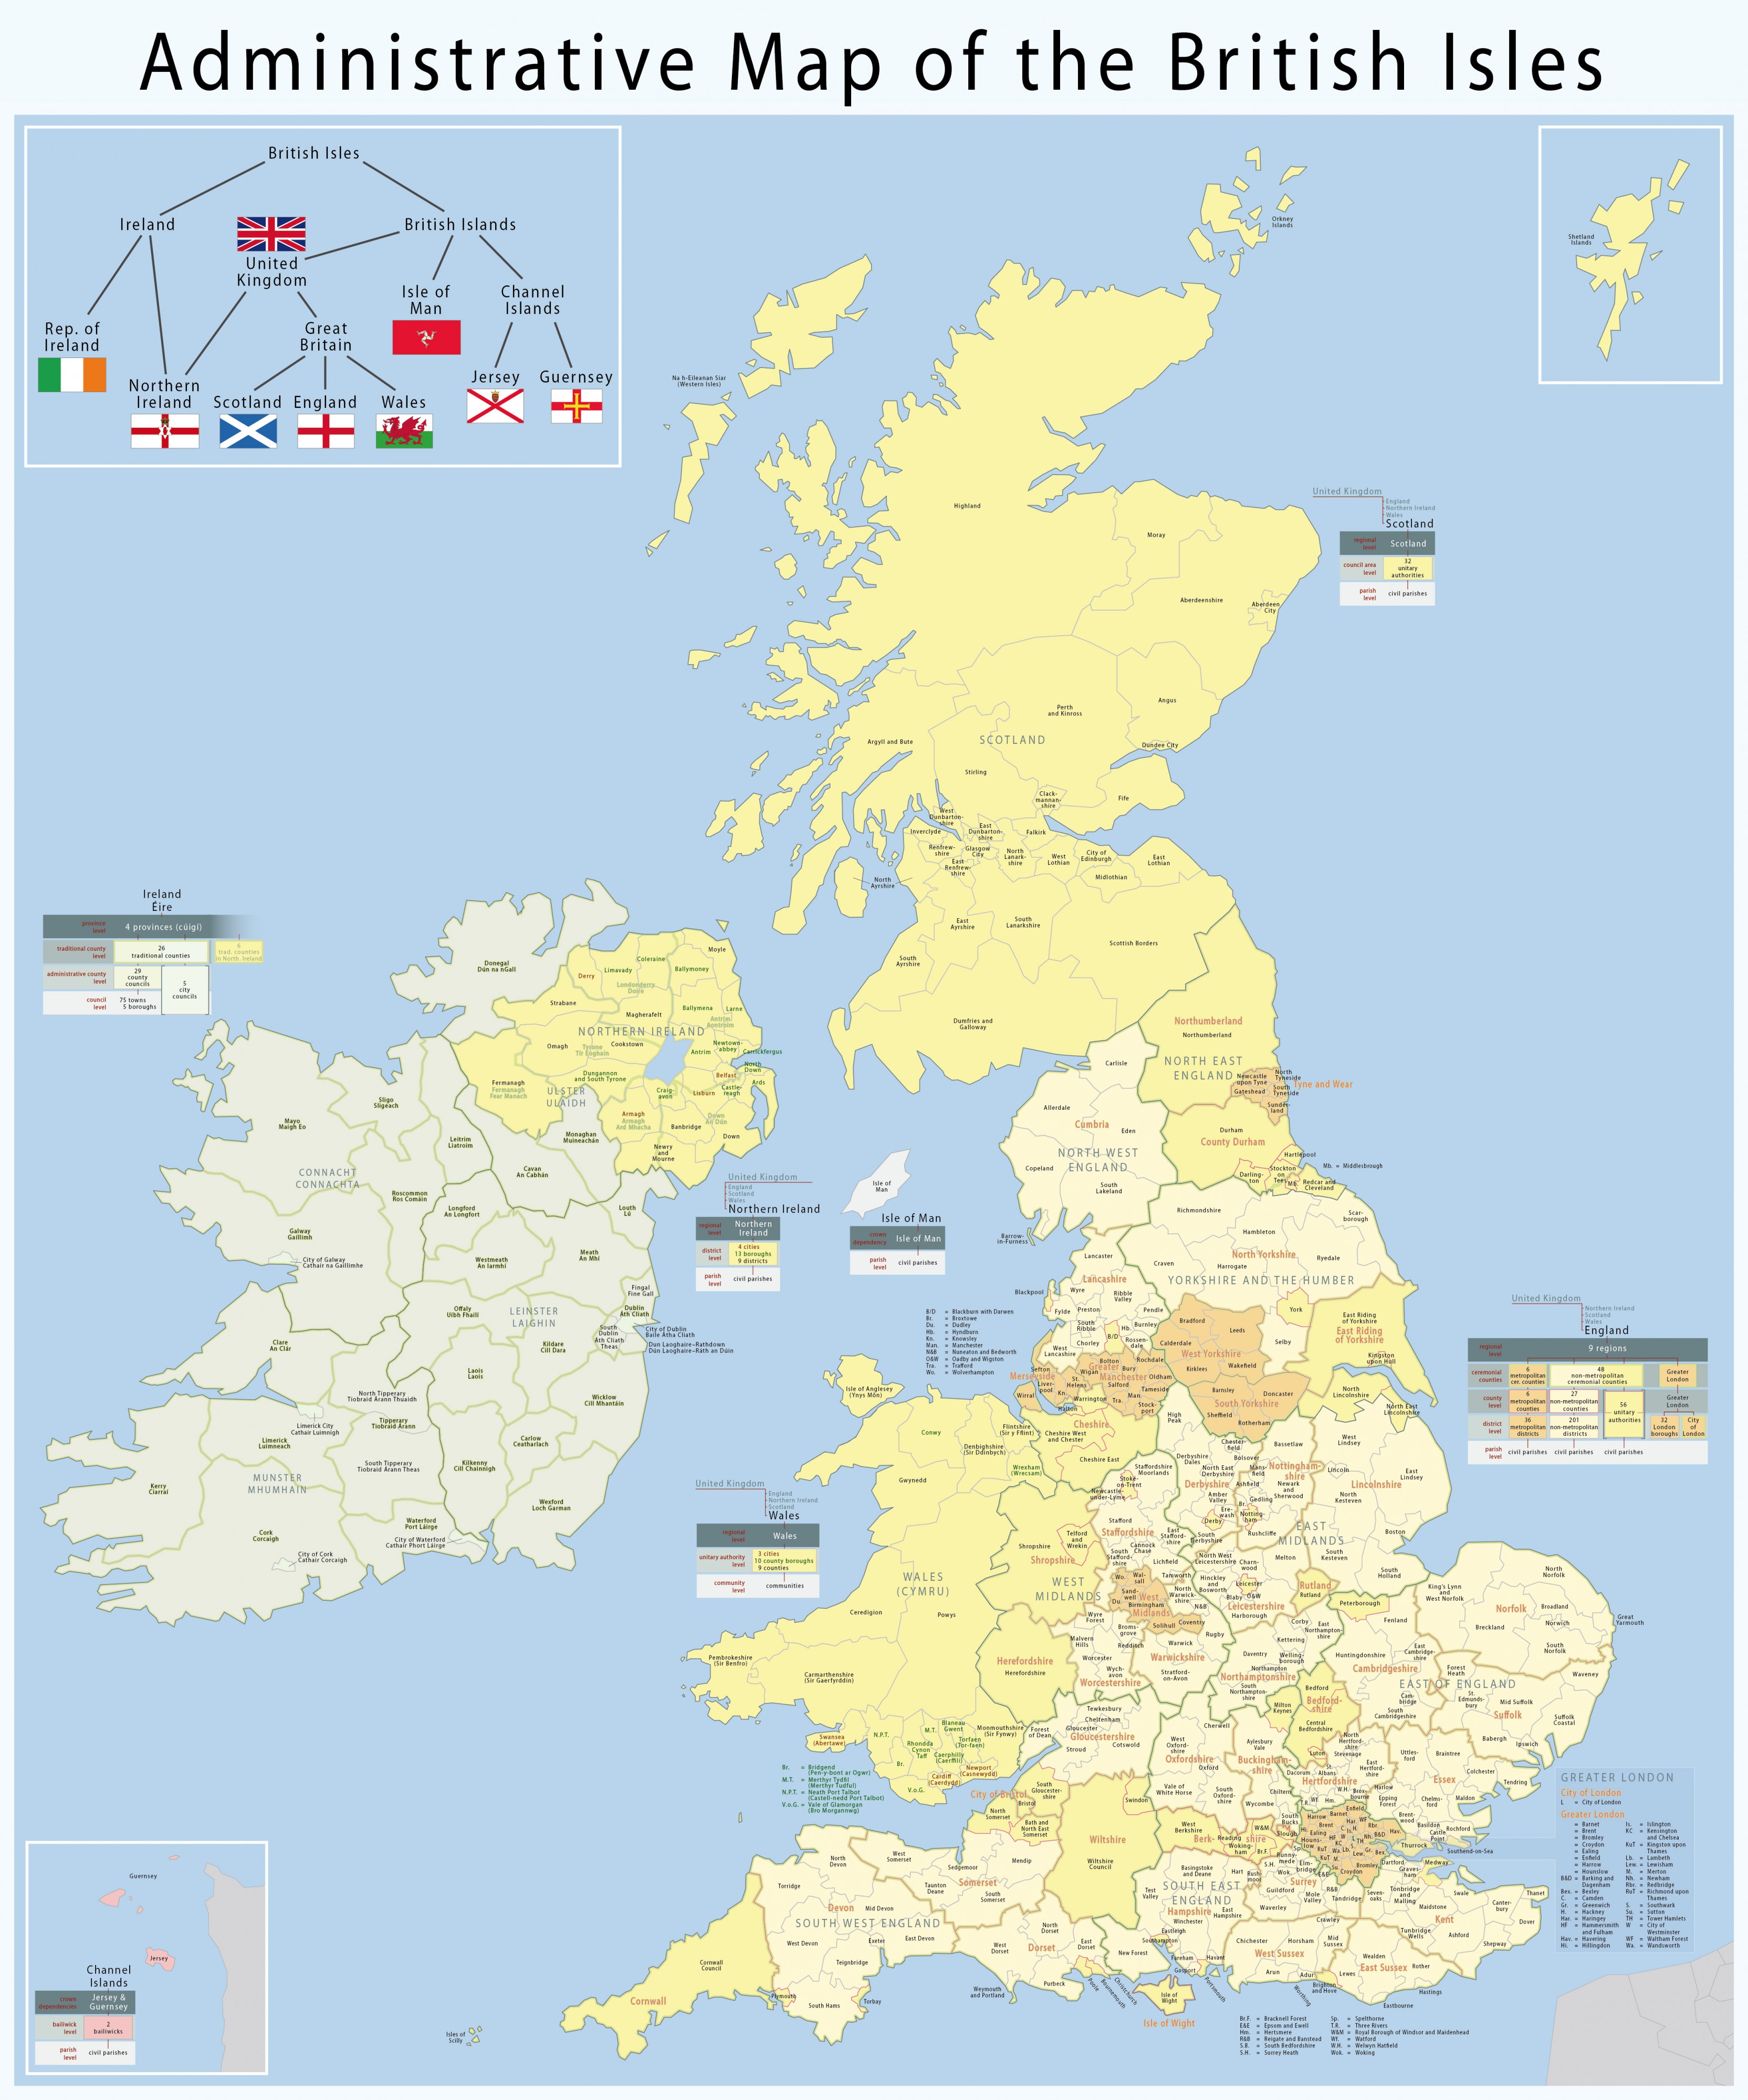 Map of the administrative geography of the British Isles